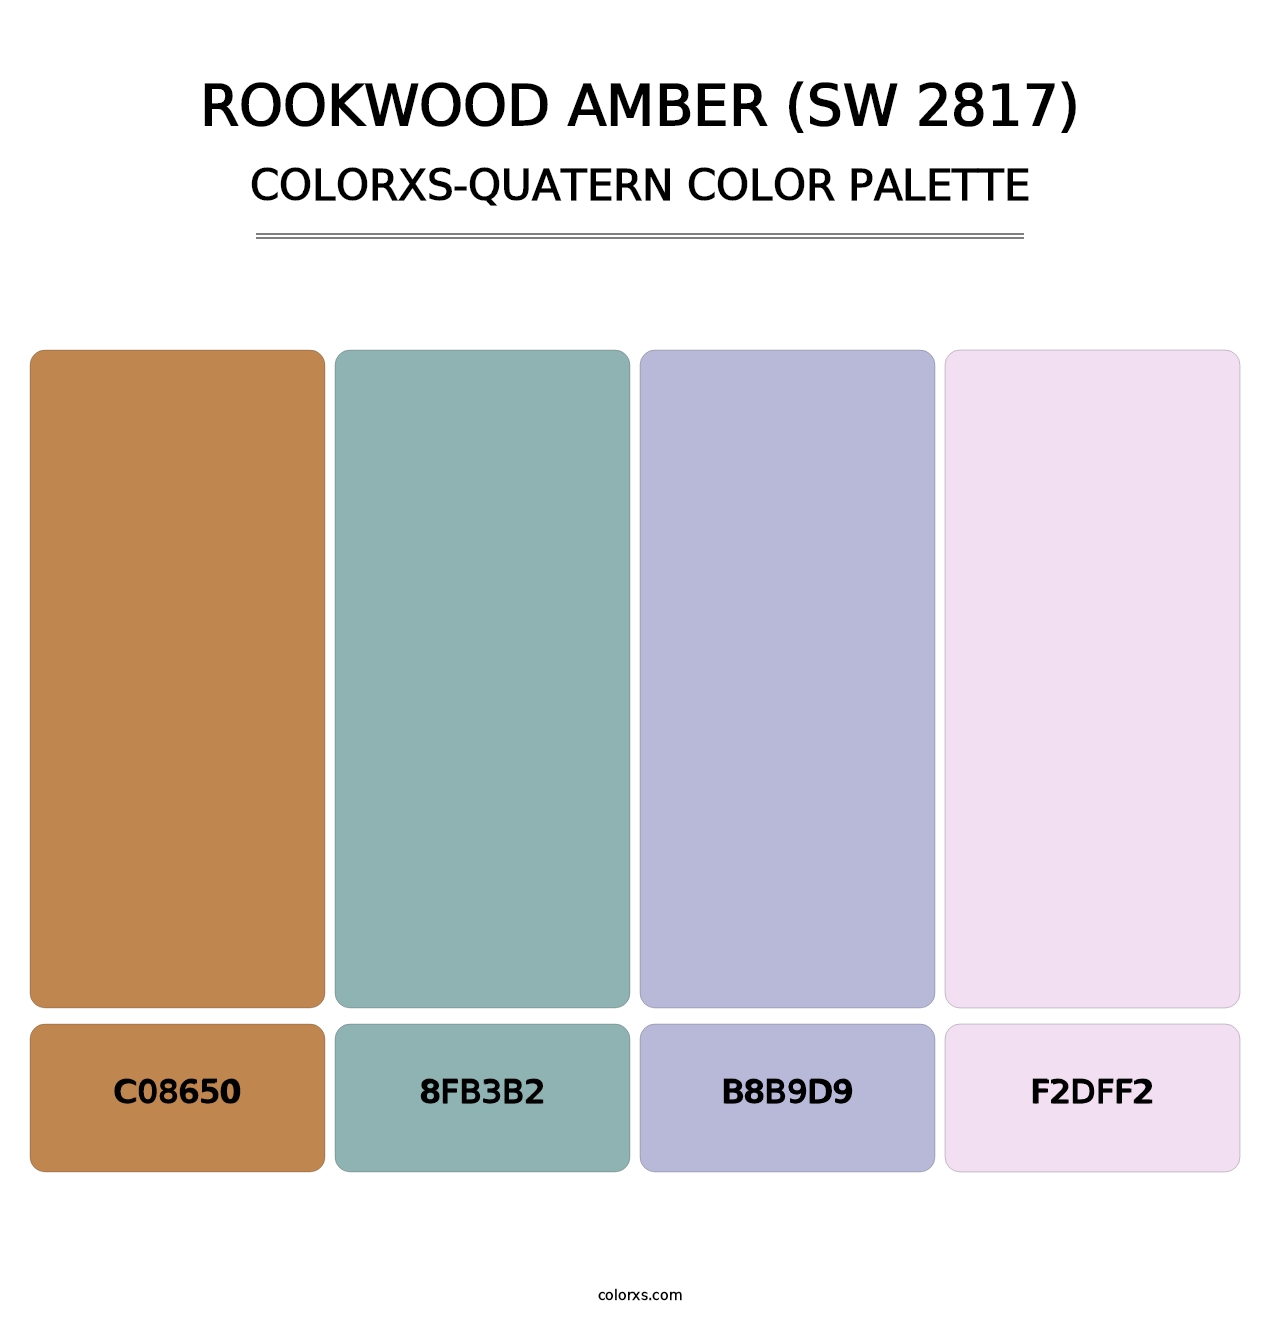 Rookwood Amber (SW 2817) - Colorxs Quatern Palette